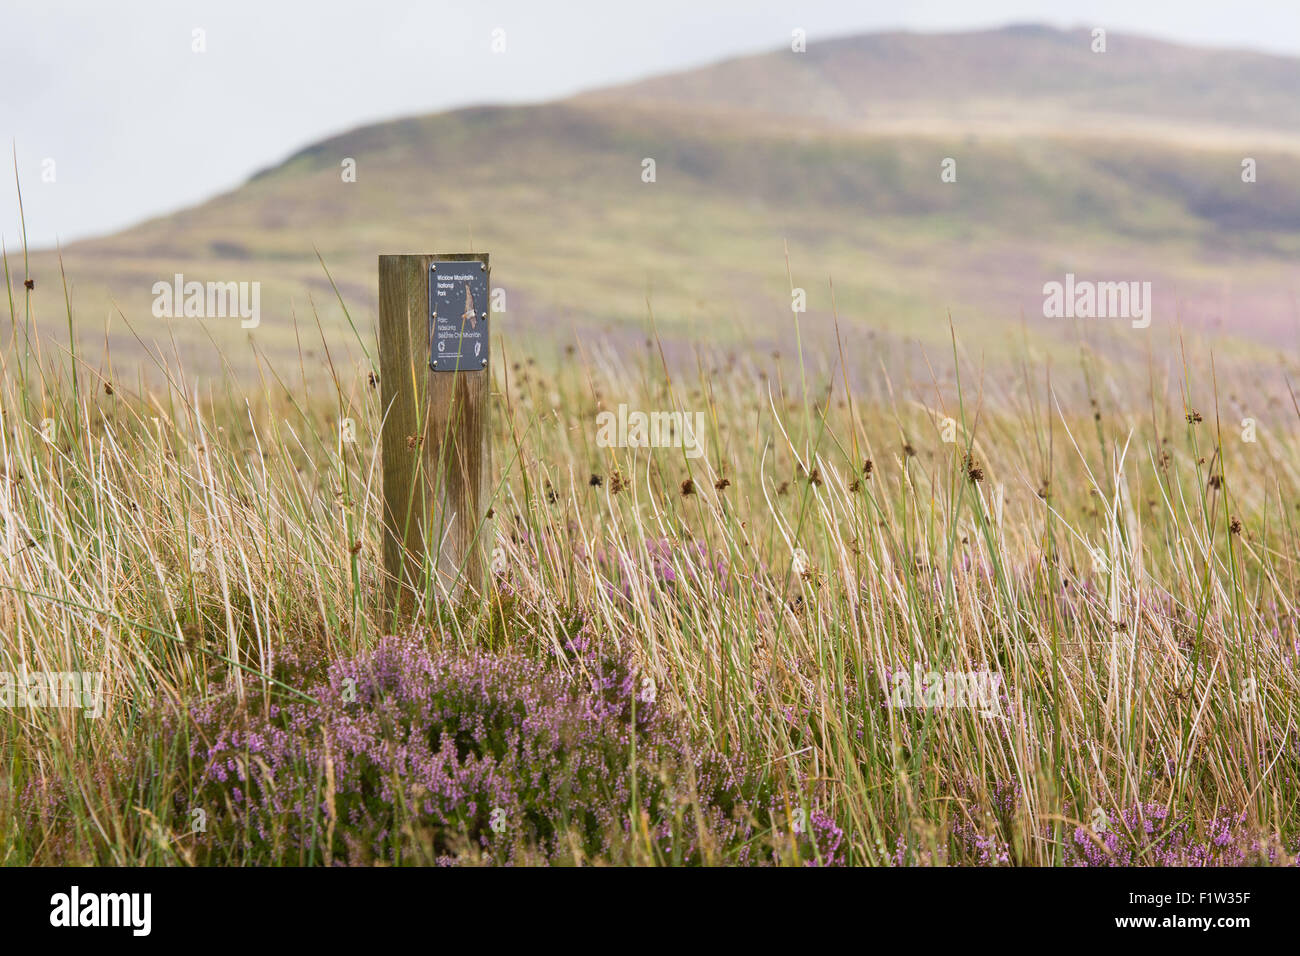 Wicklow Mountains National Park sign against backdrop of the Wicklow mountains Stock Photo